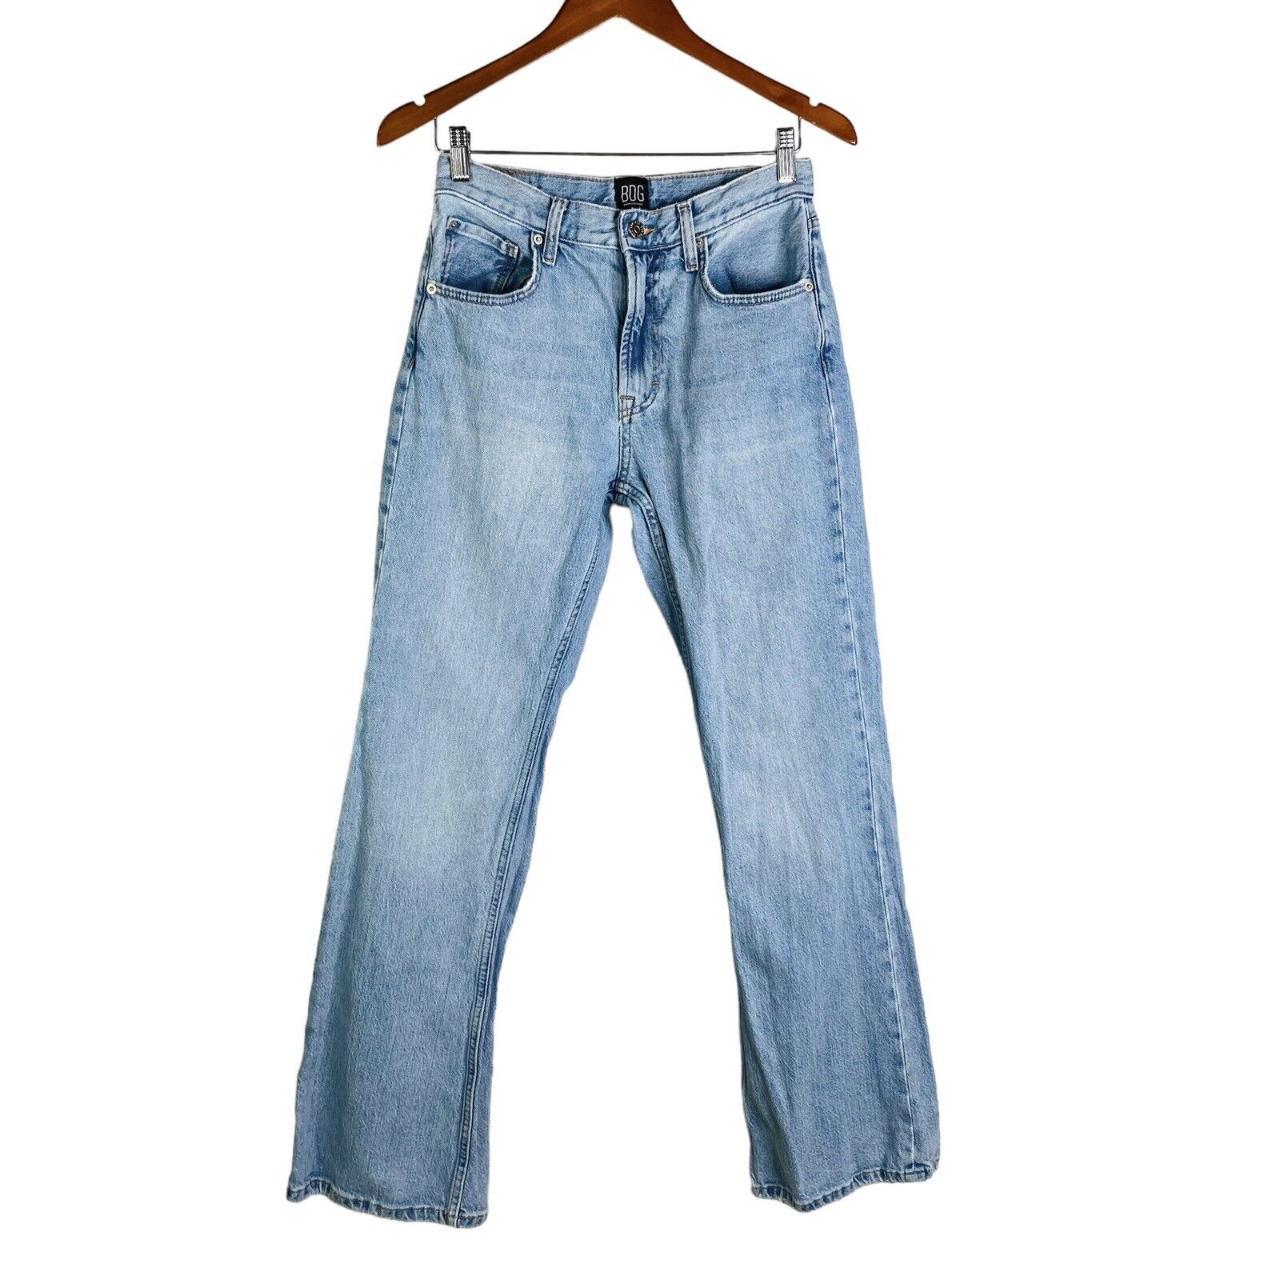 BDG Urban Outfitters Bootcut Grunge Jeans Light Wash... - Depop